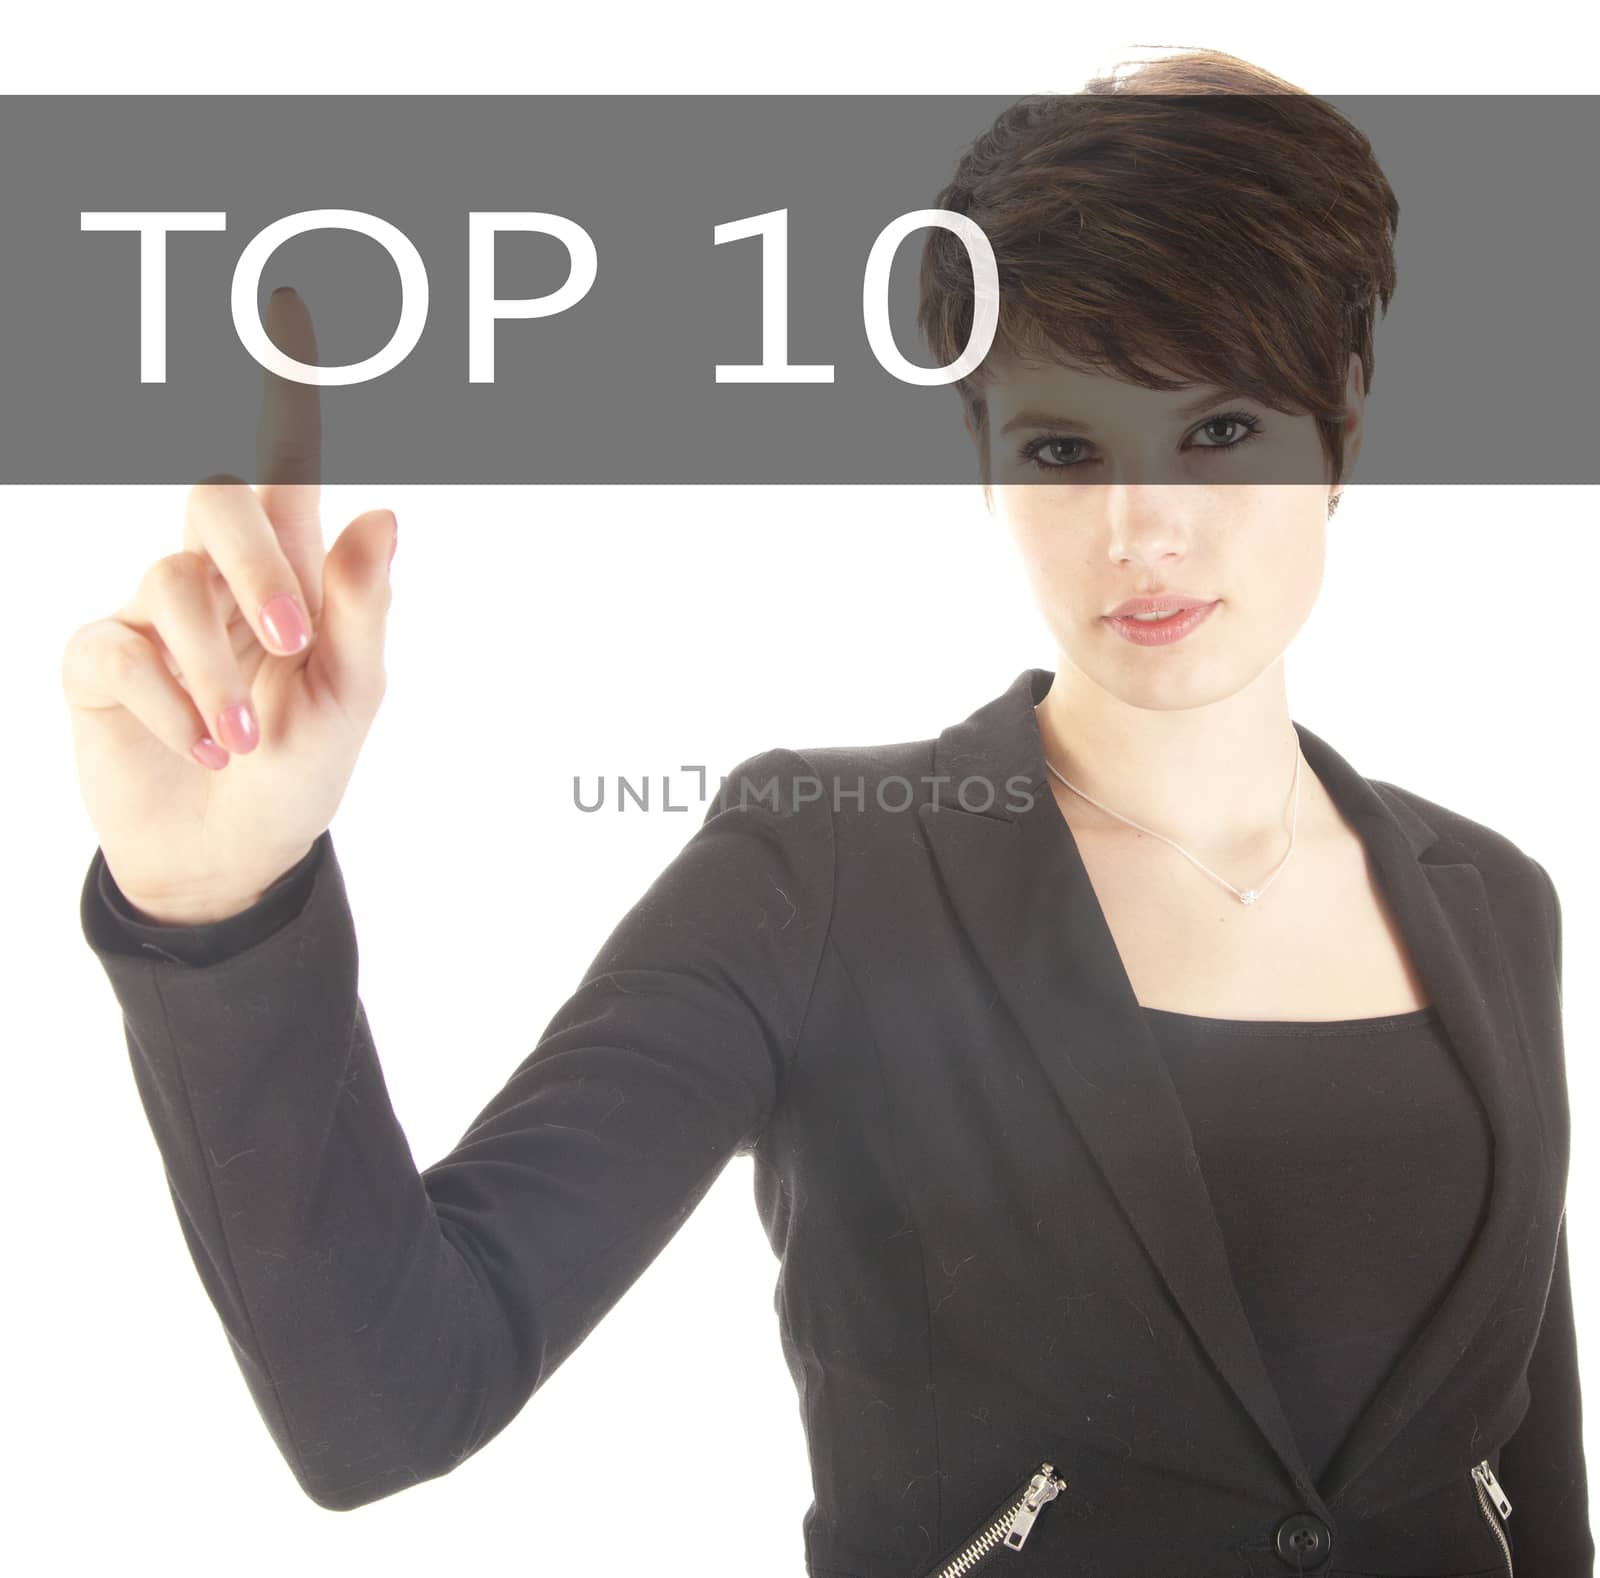 Business woman with top 10 sign on white background